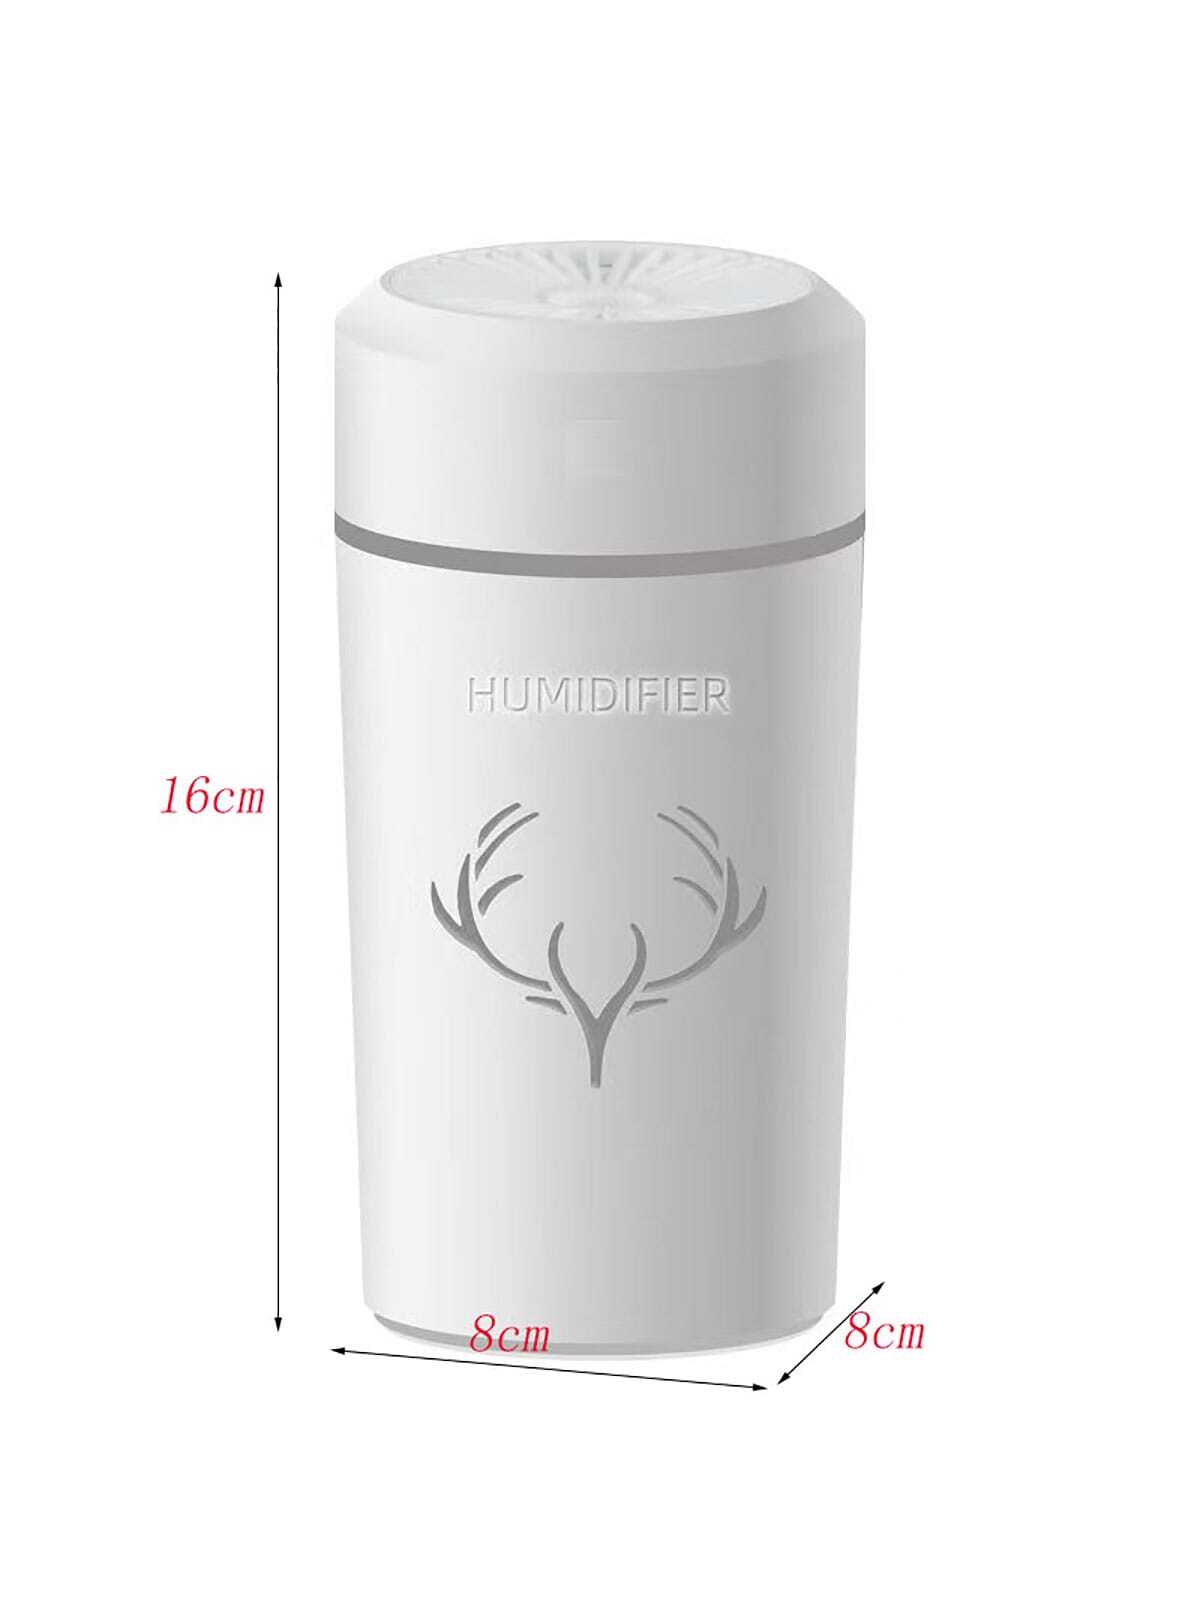 Large-capacity Usb Humidifier, Portable Mini Car/office/desktop/mute/baby Room Air Purifier, Y-06-White-6